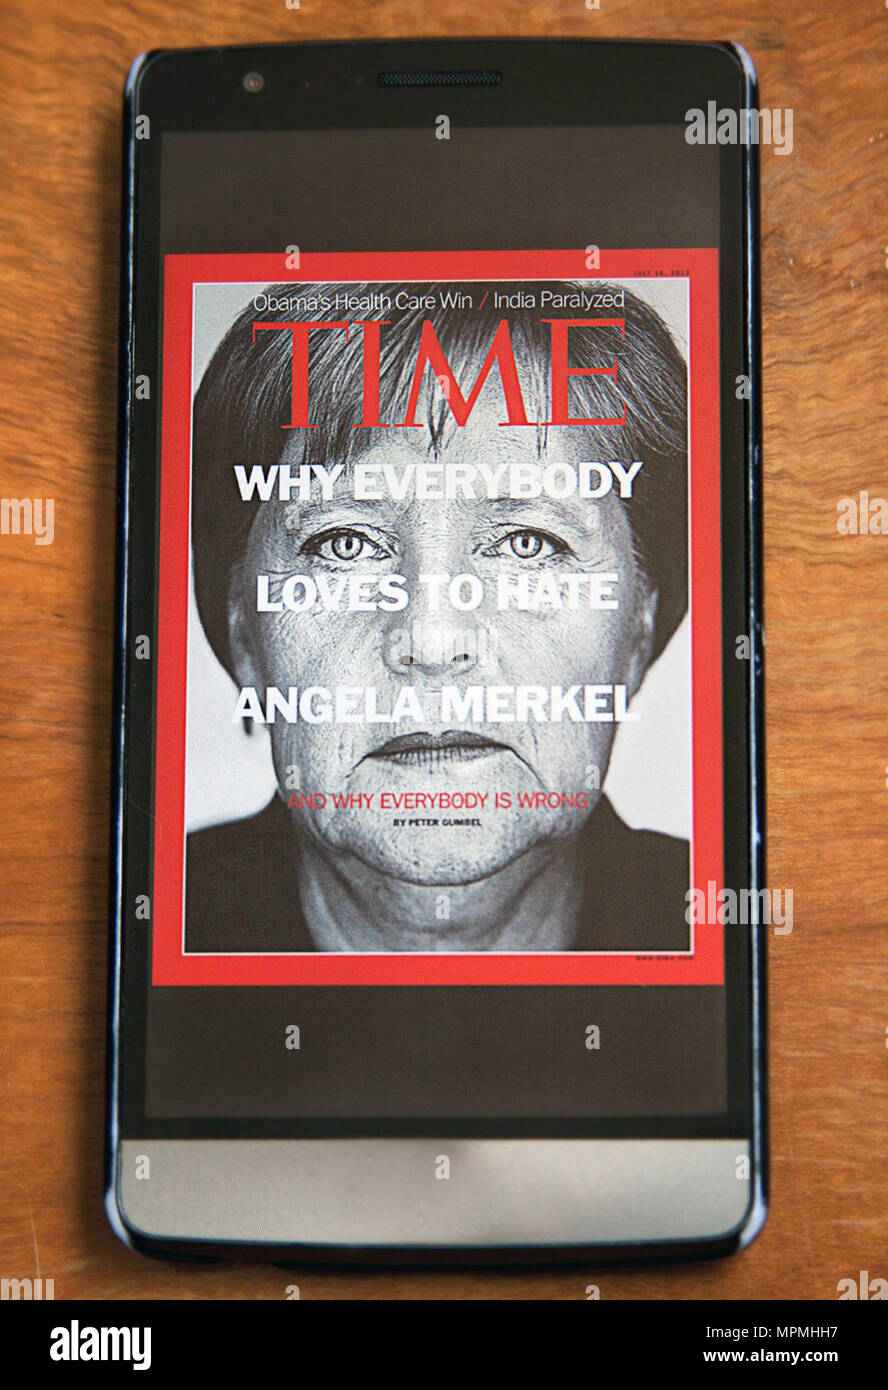 Angela Merkel on the Cover of Time magazine on a Smartphone Stock Photo